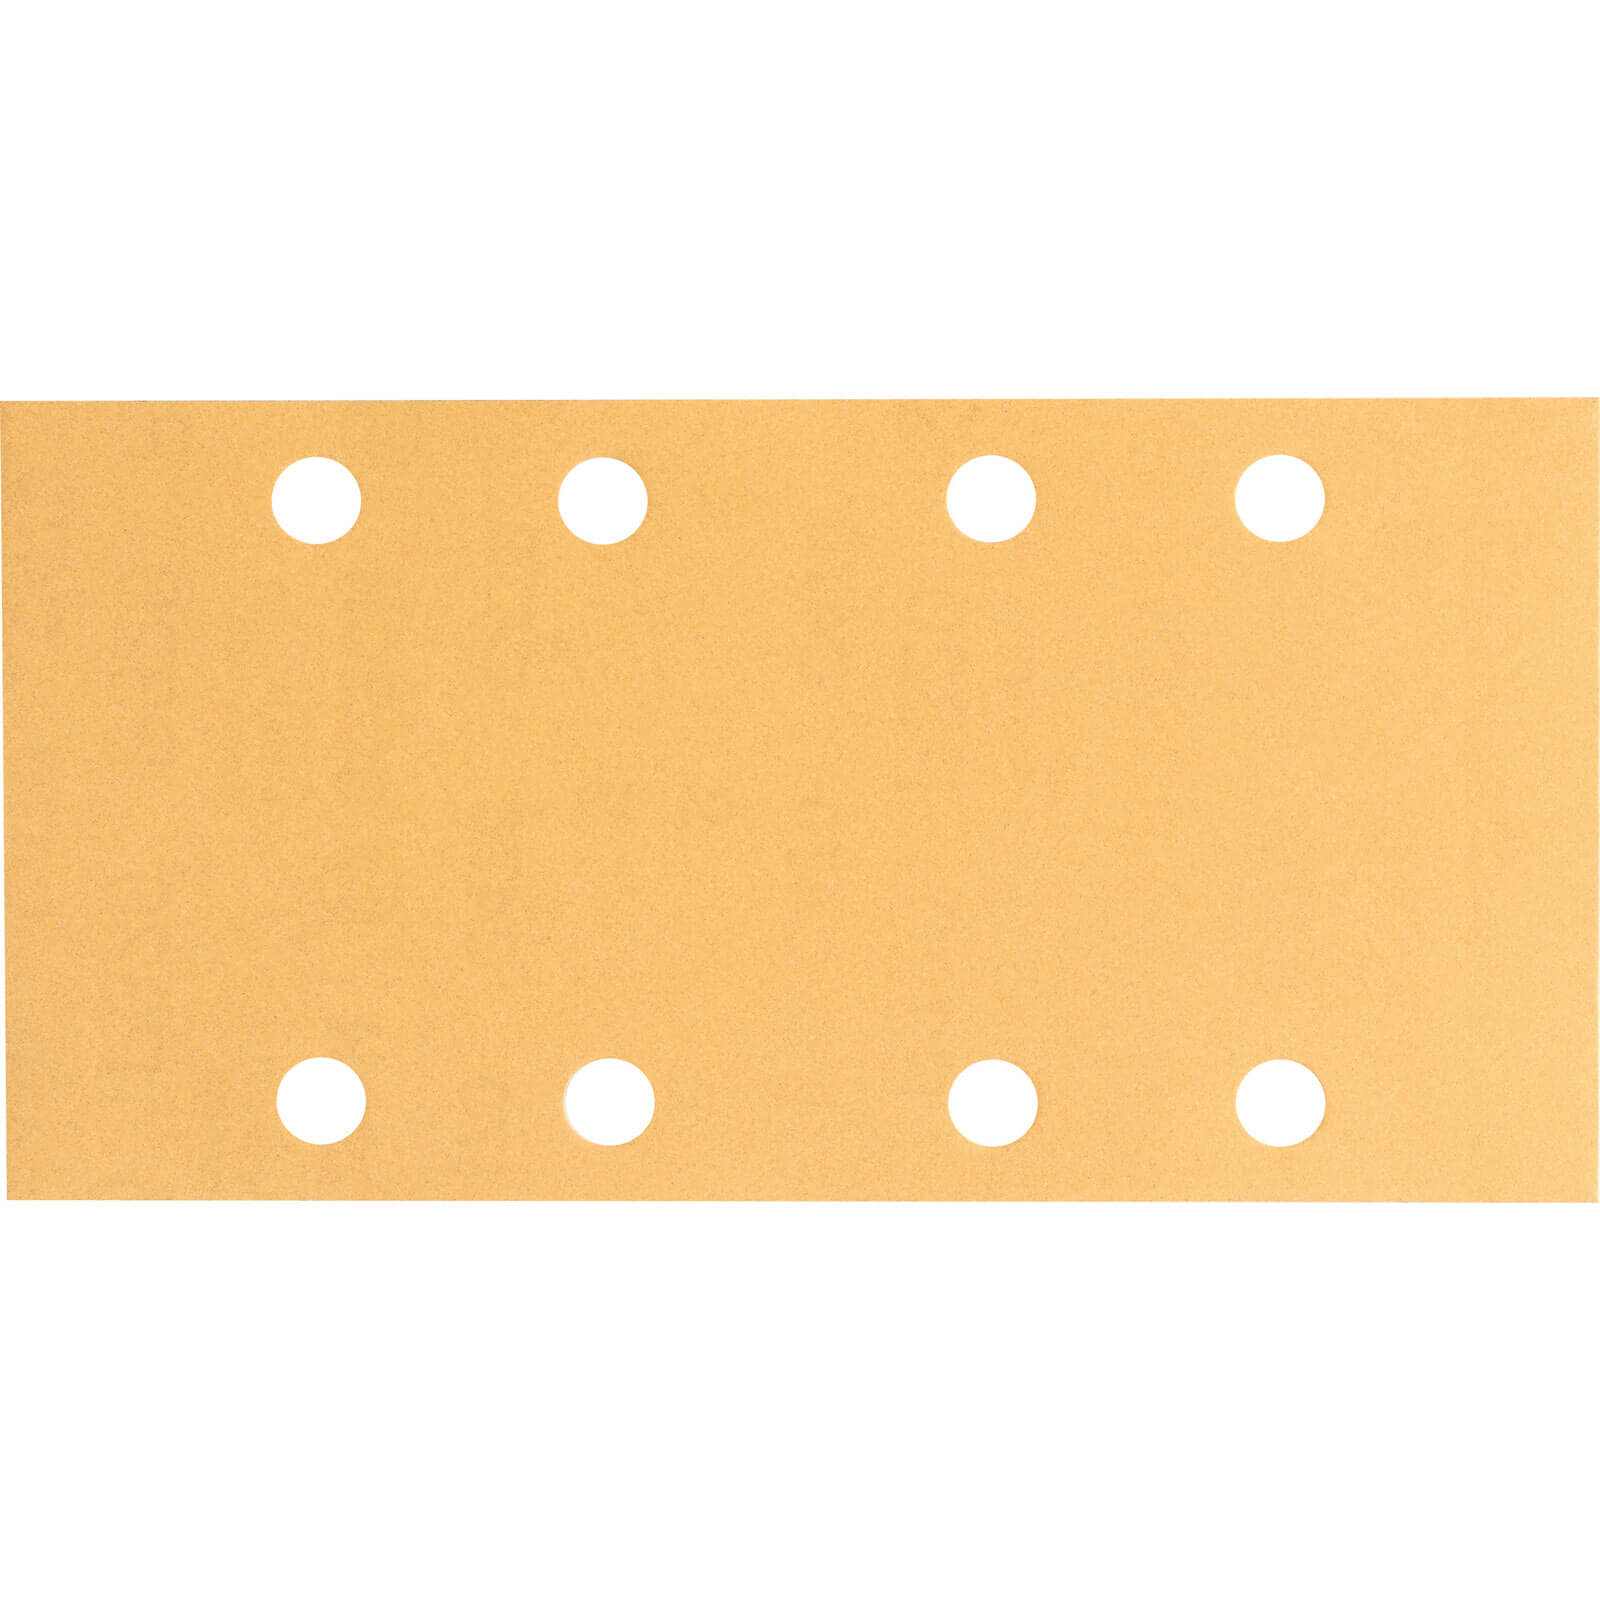 Image of Bosch Punched Hook and Loop Sanding Sheets 93mm x 186mm 320g Pack of 10